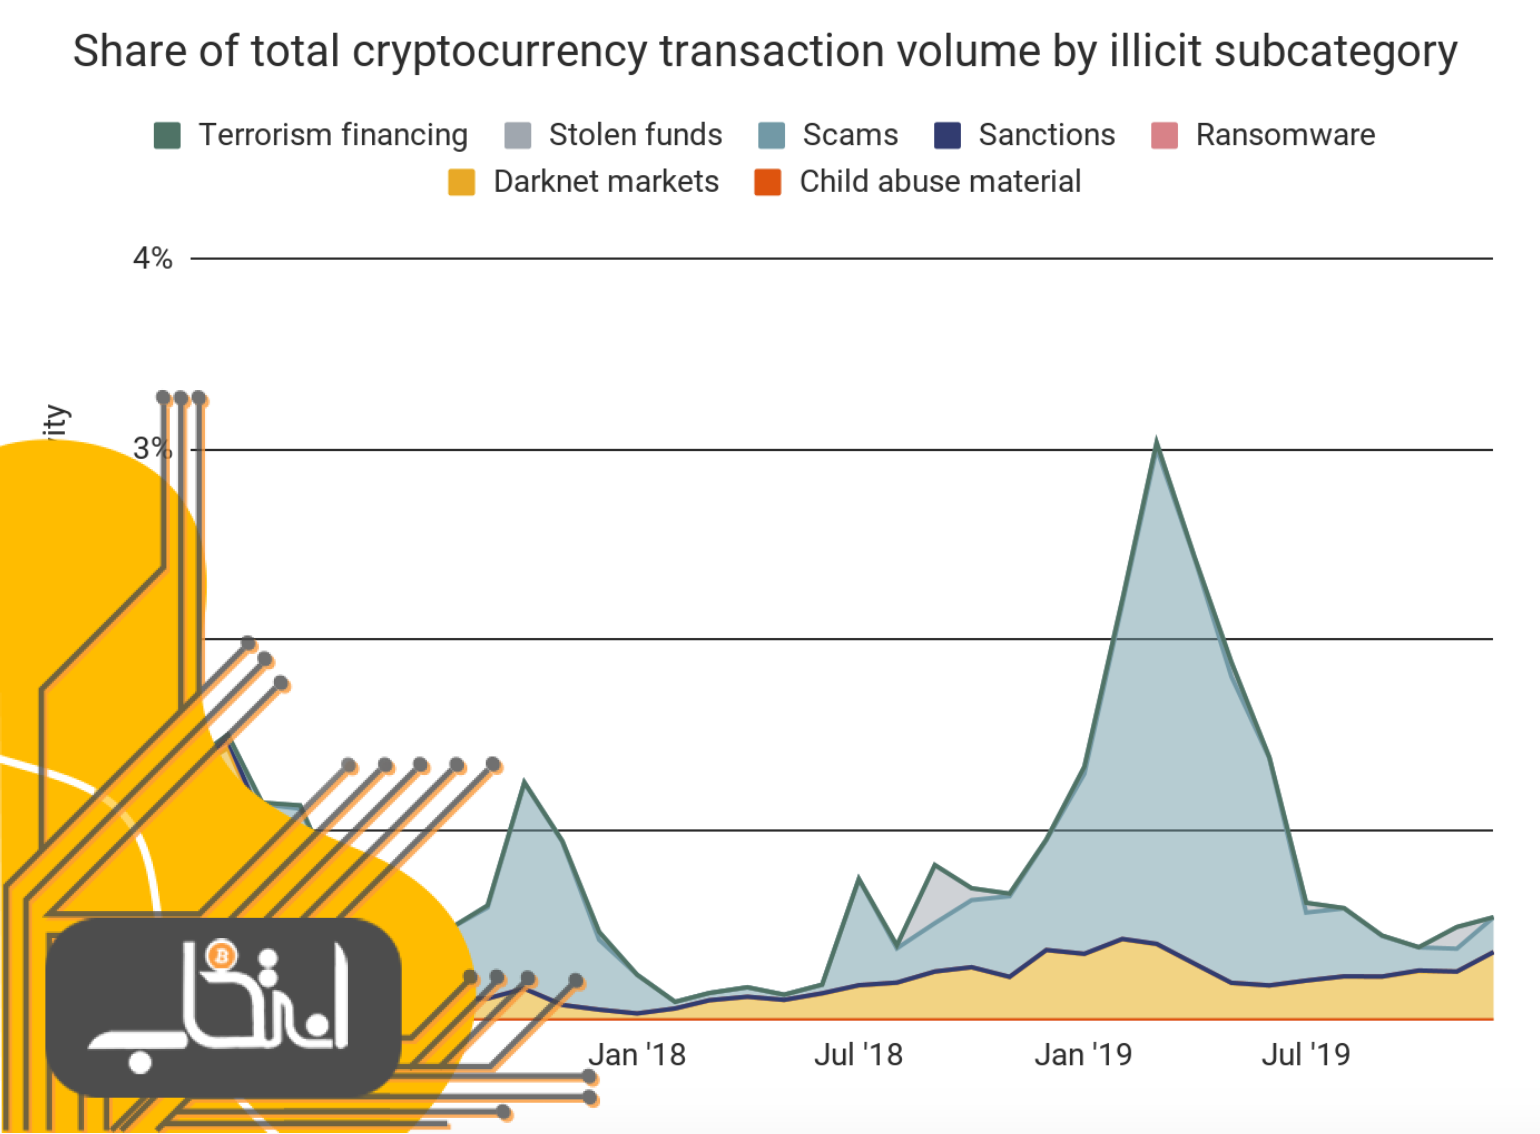 Bitcoin by Illicit Subcategory